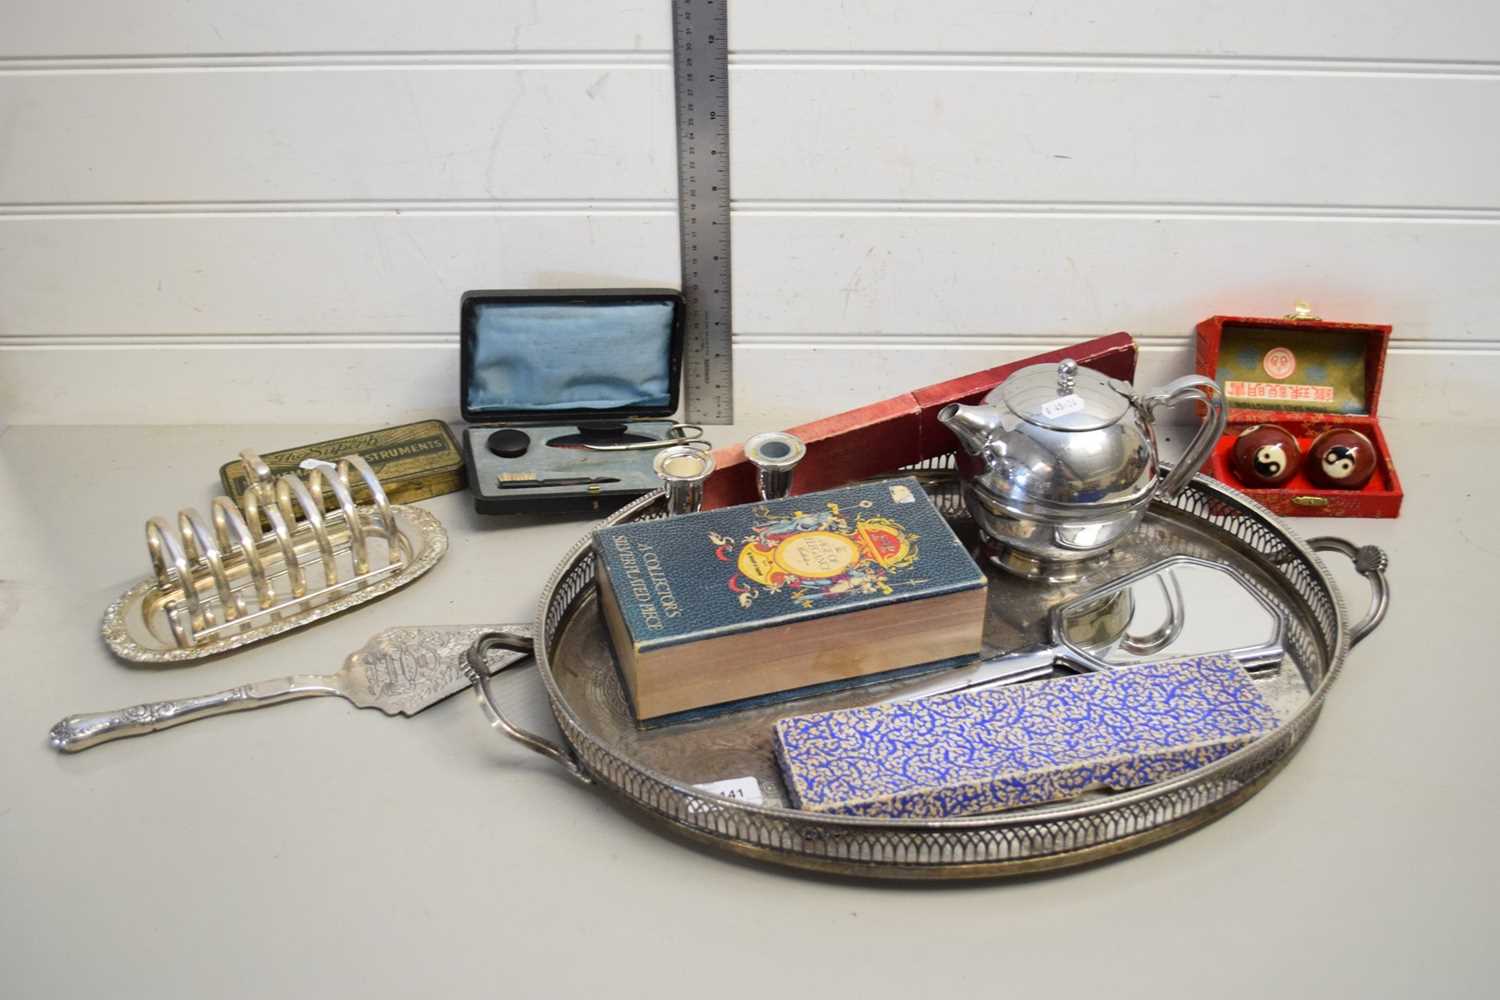 SILVER PLATED TRAY CONTAINING MANICURE SET, TOAST RACK, WORRY BALLS, CANDLESTICKS ETC